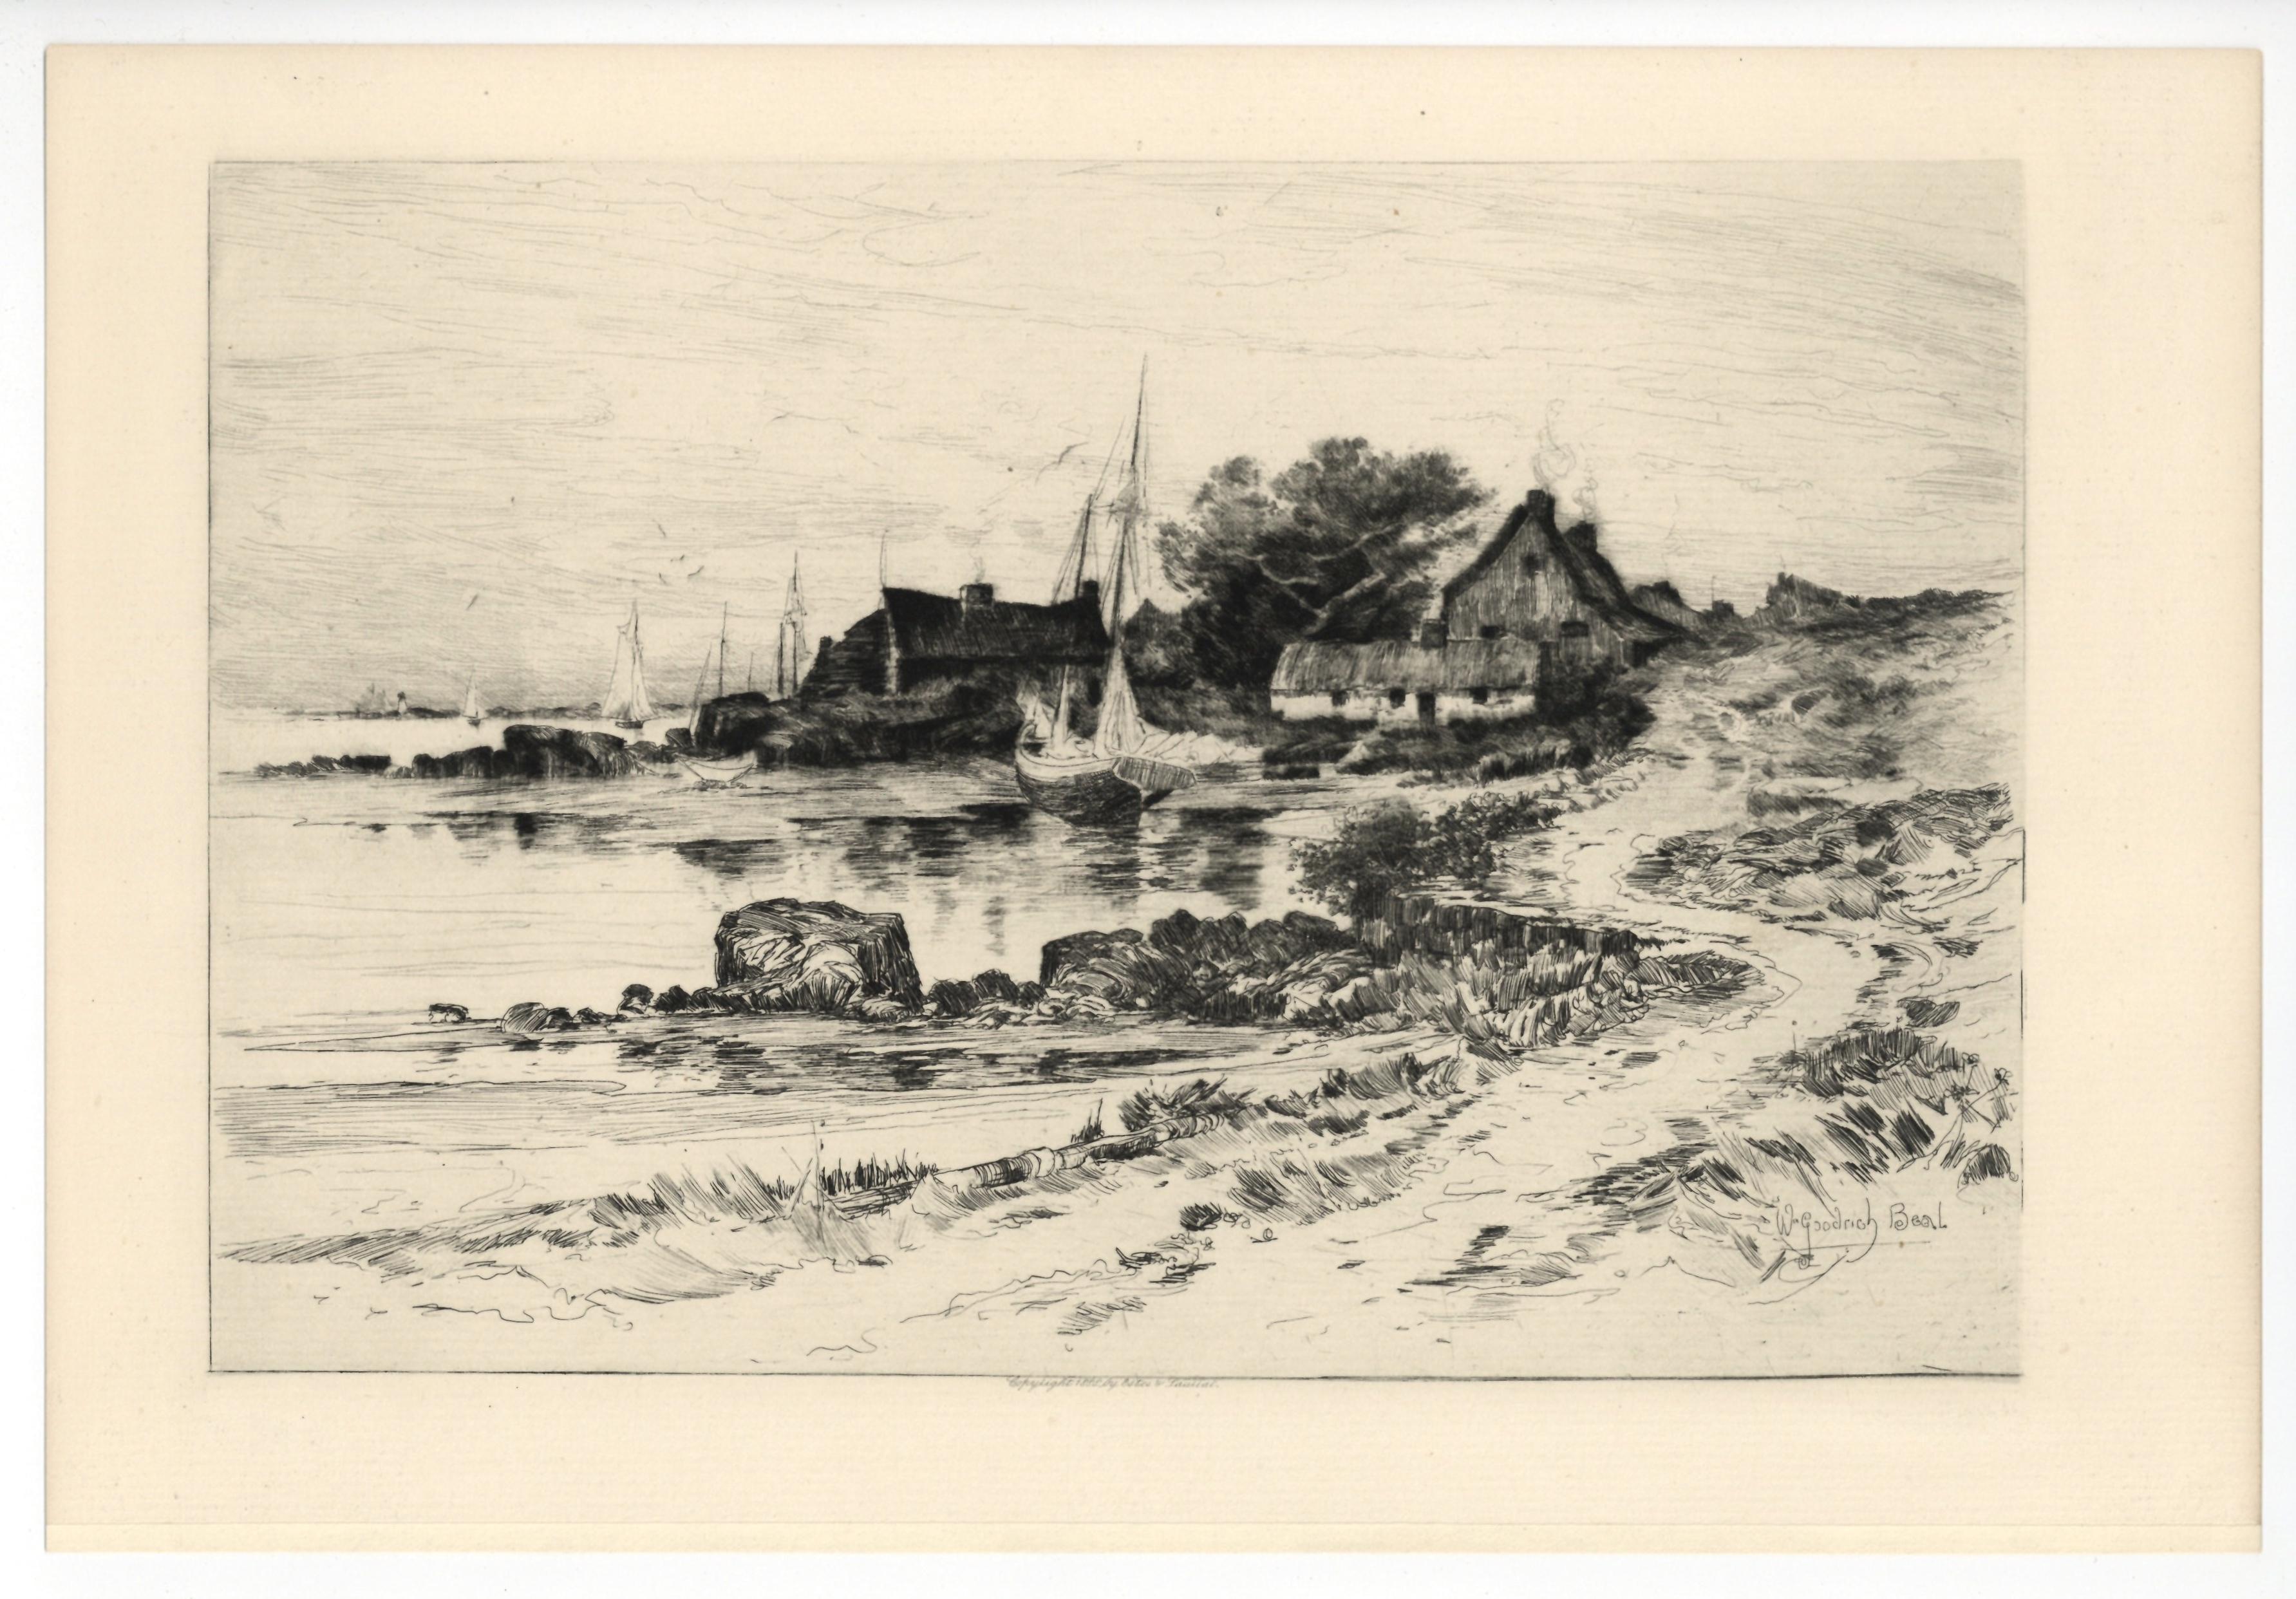 "On Gloucester Shore" original etching - Print by William Goodrich Beal